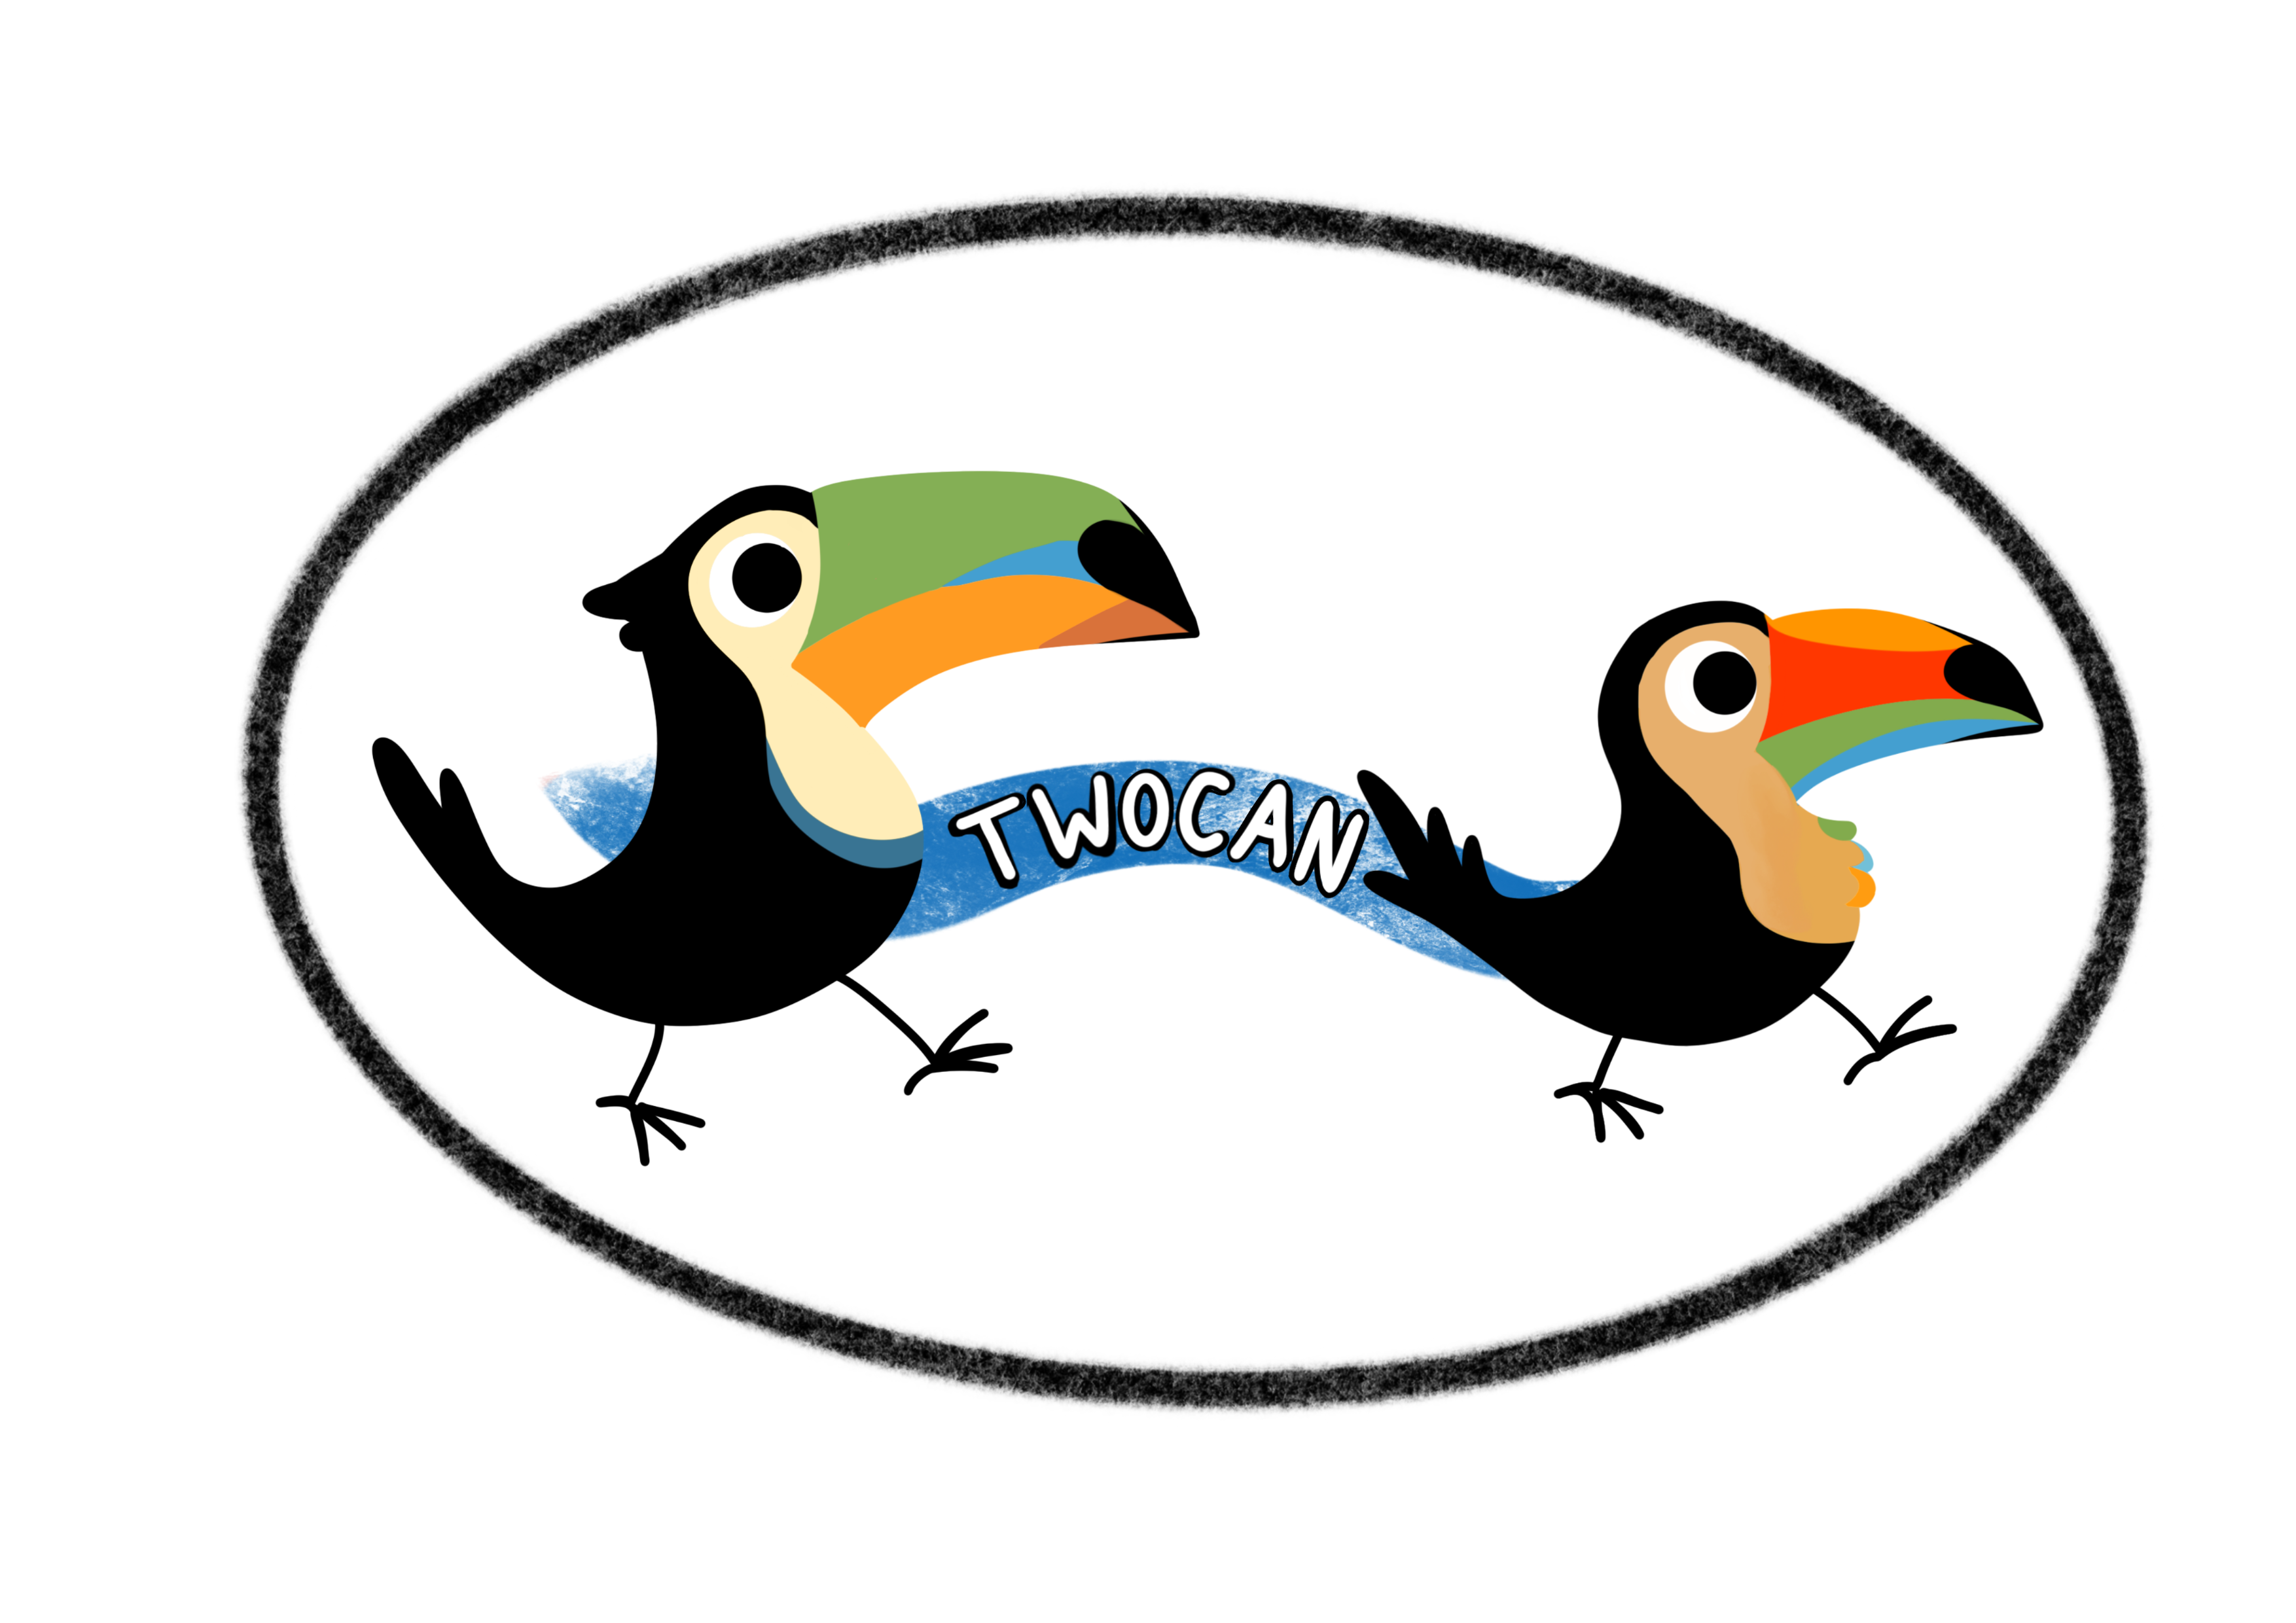 Two Toucan birds are in motion walking to the left with a wave of blue behind them with the text TWOCAN written in between them